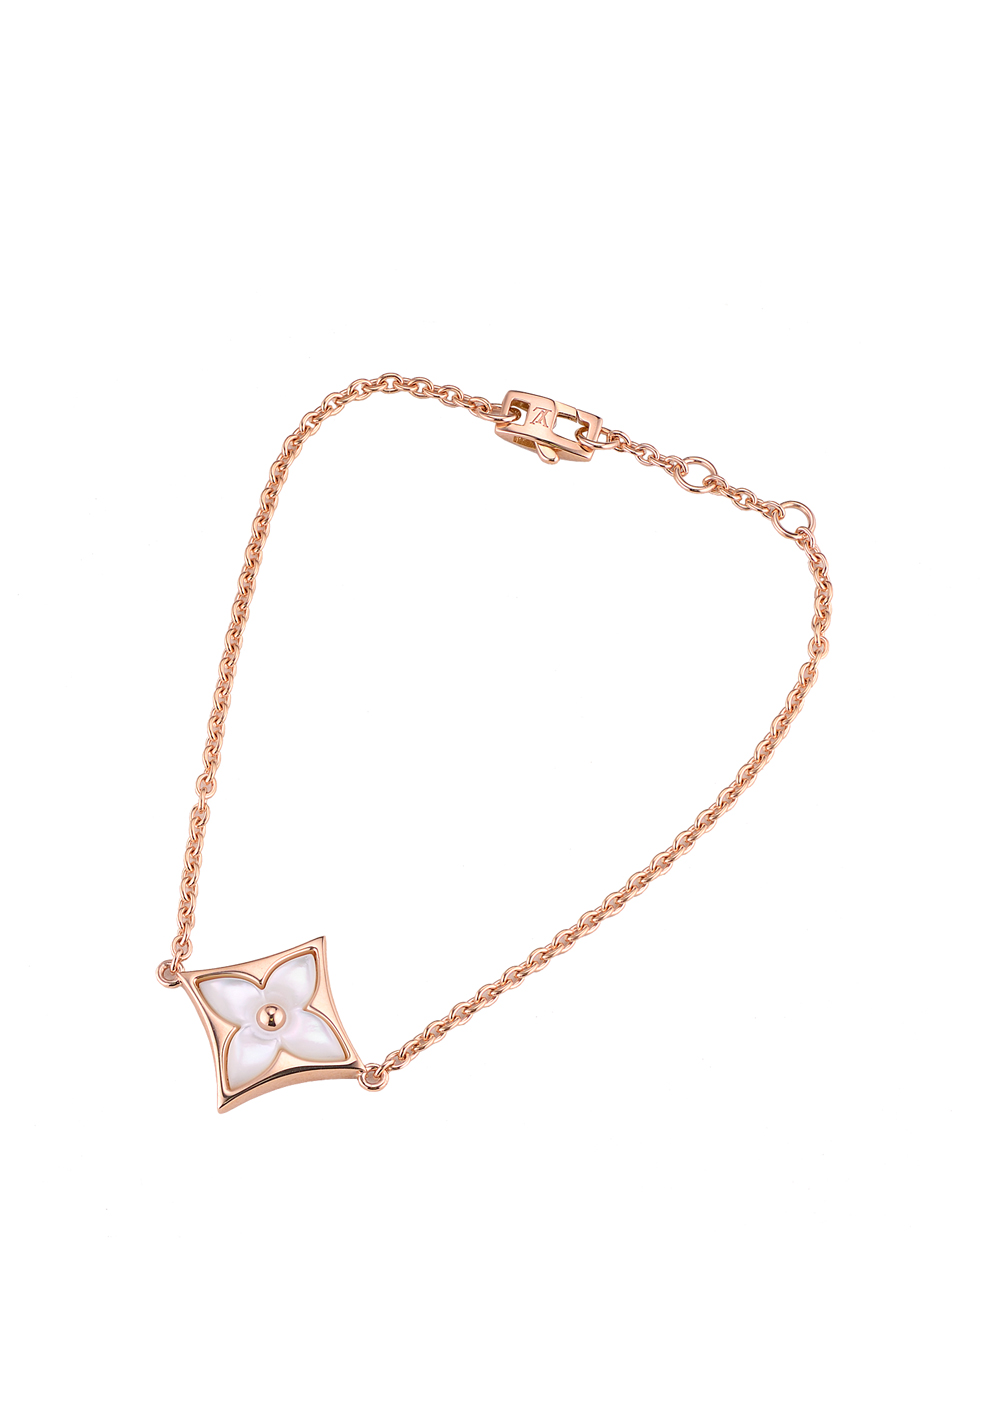 Louis Vuitton - Color blossom BB Star bracelet, pink gold, pink pearl and  diamond